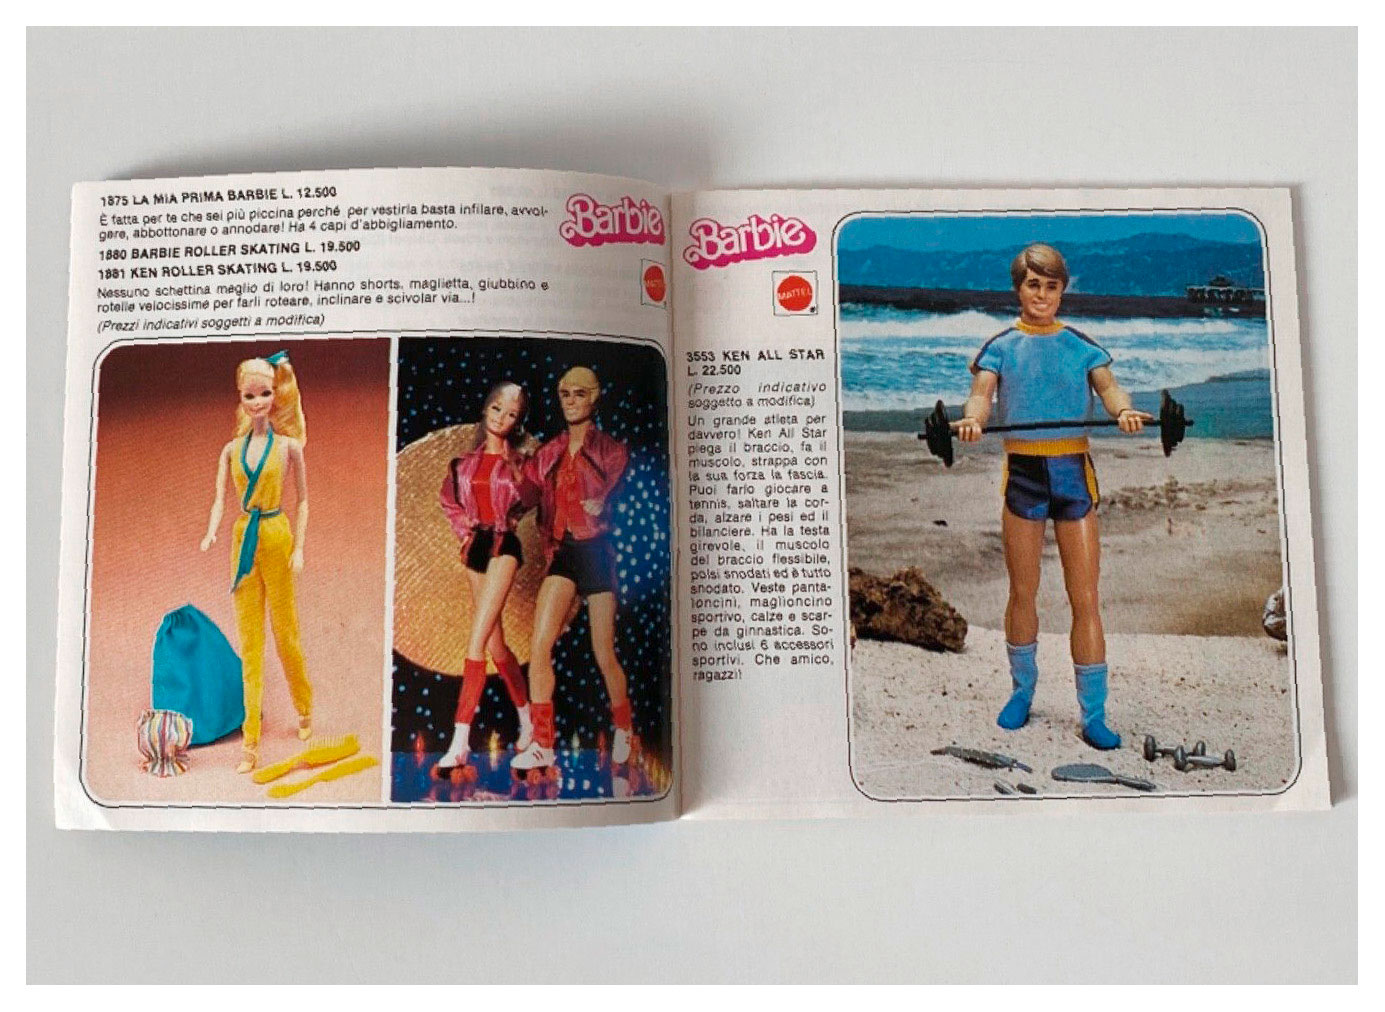 From 1982 Italian Barbie booklet